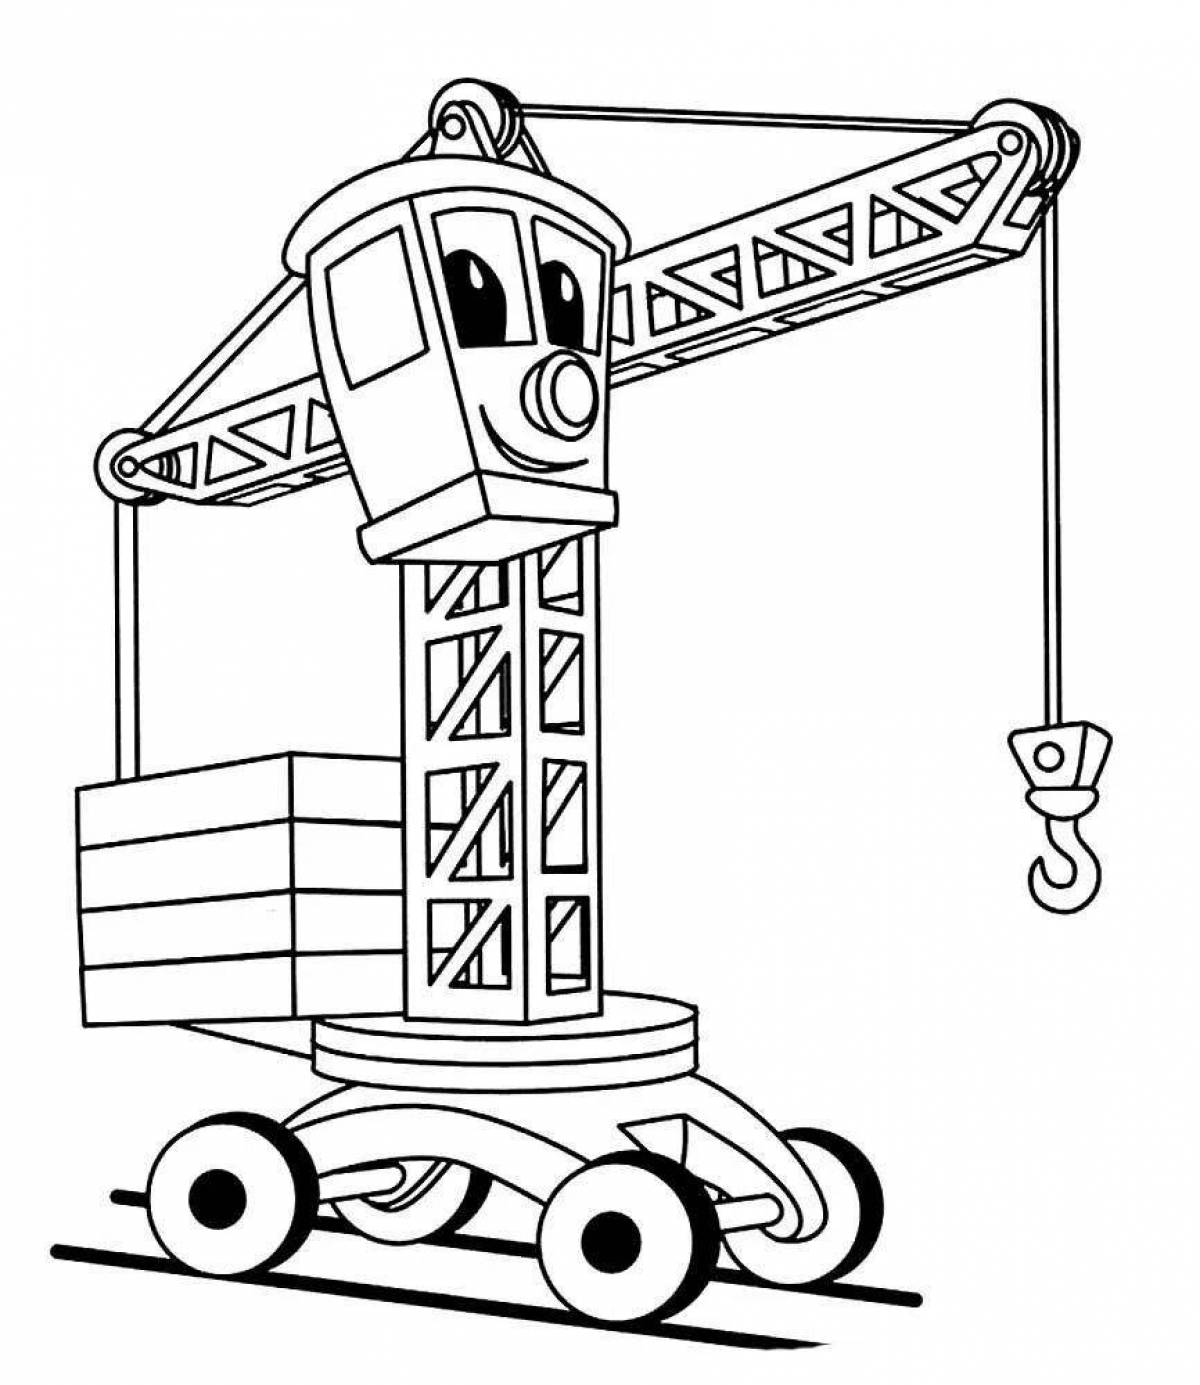 Tempting construction machinery coloring page for 6-7 year olds